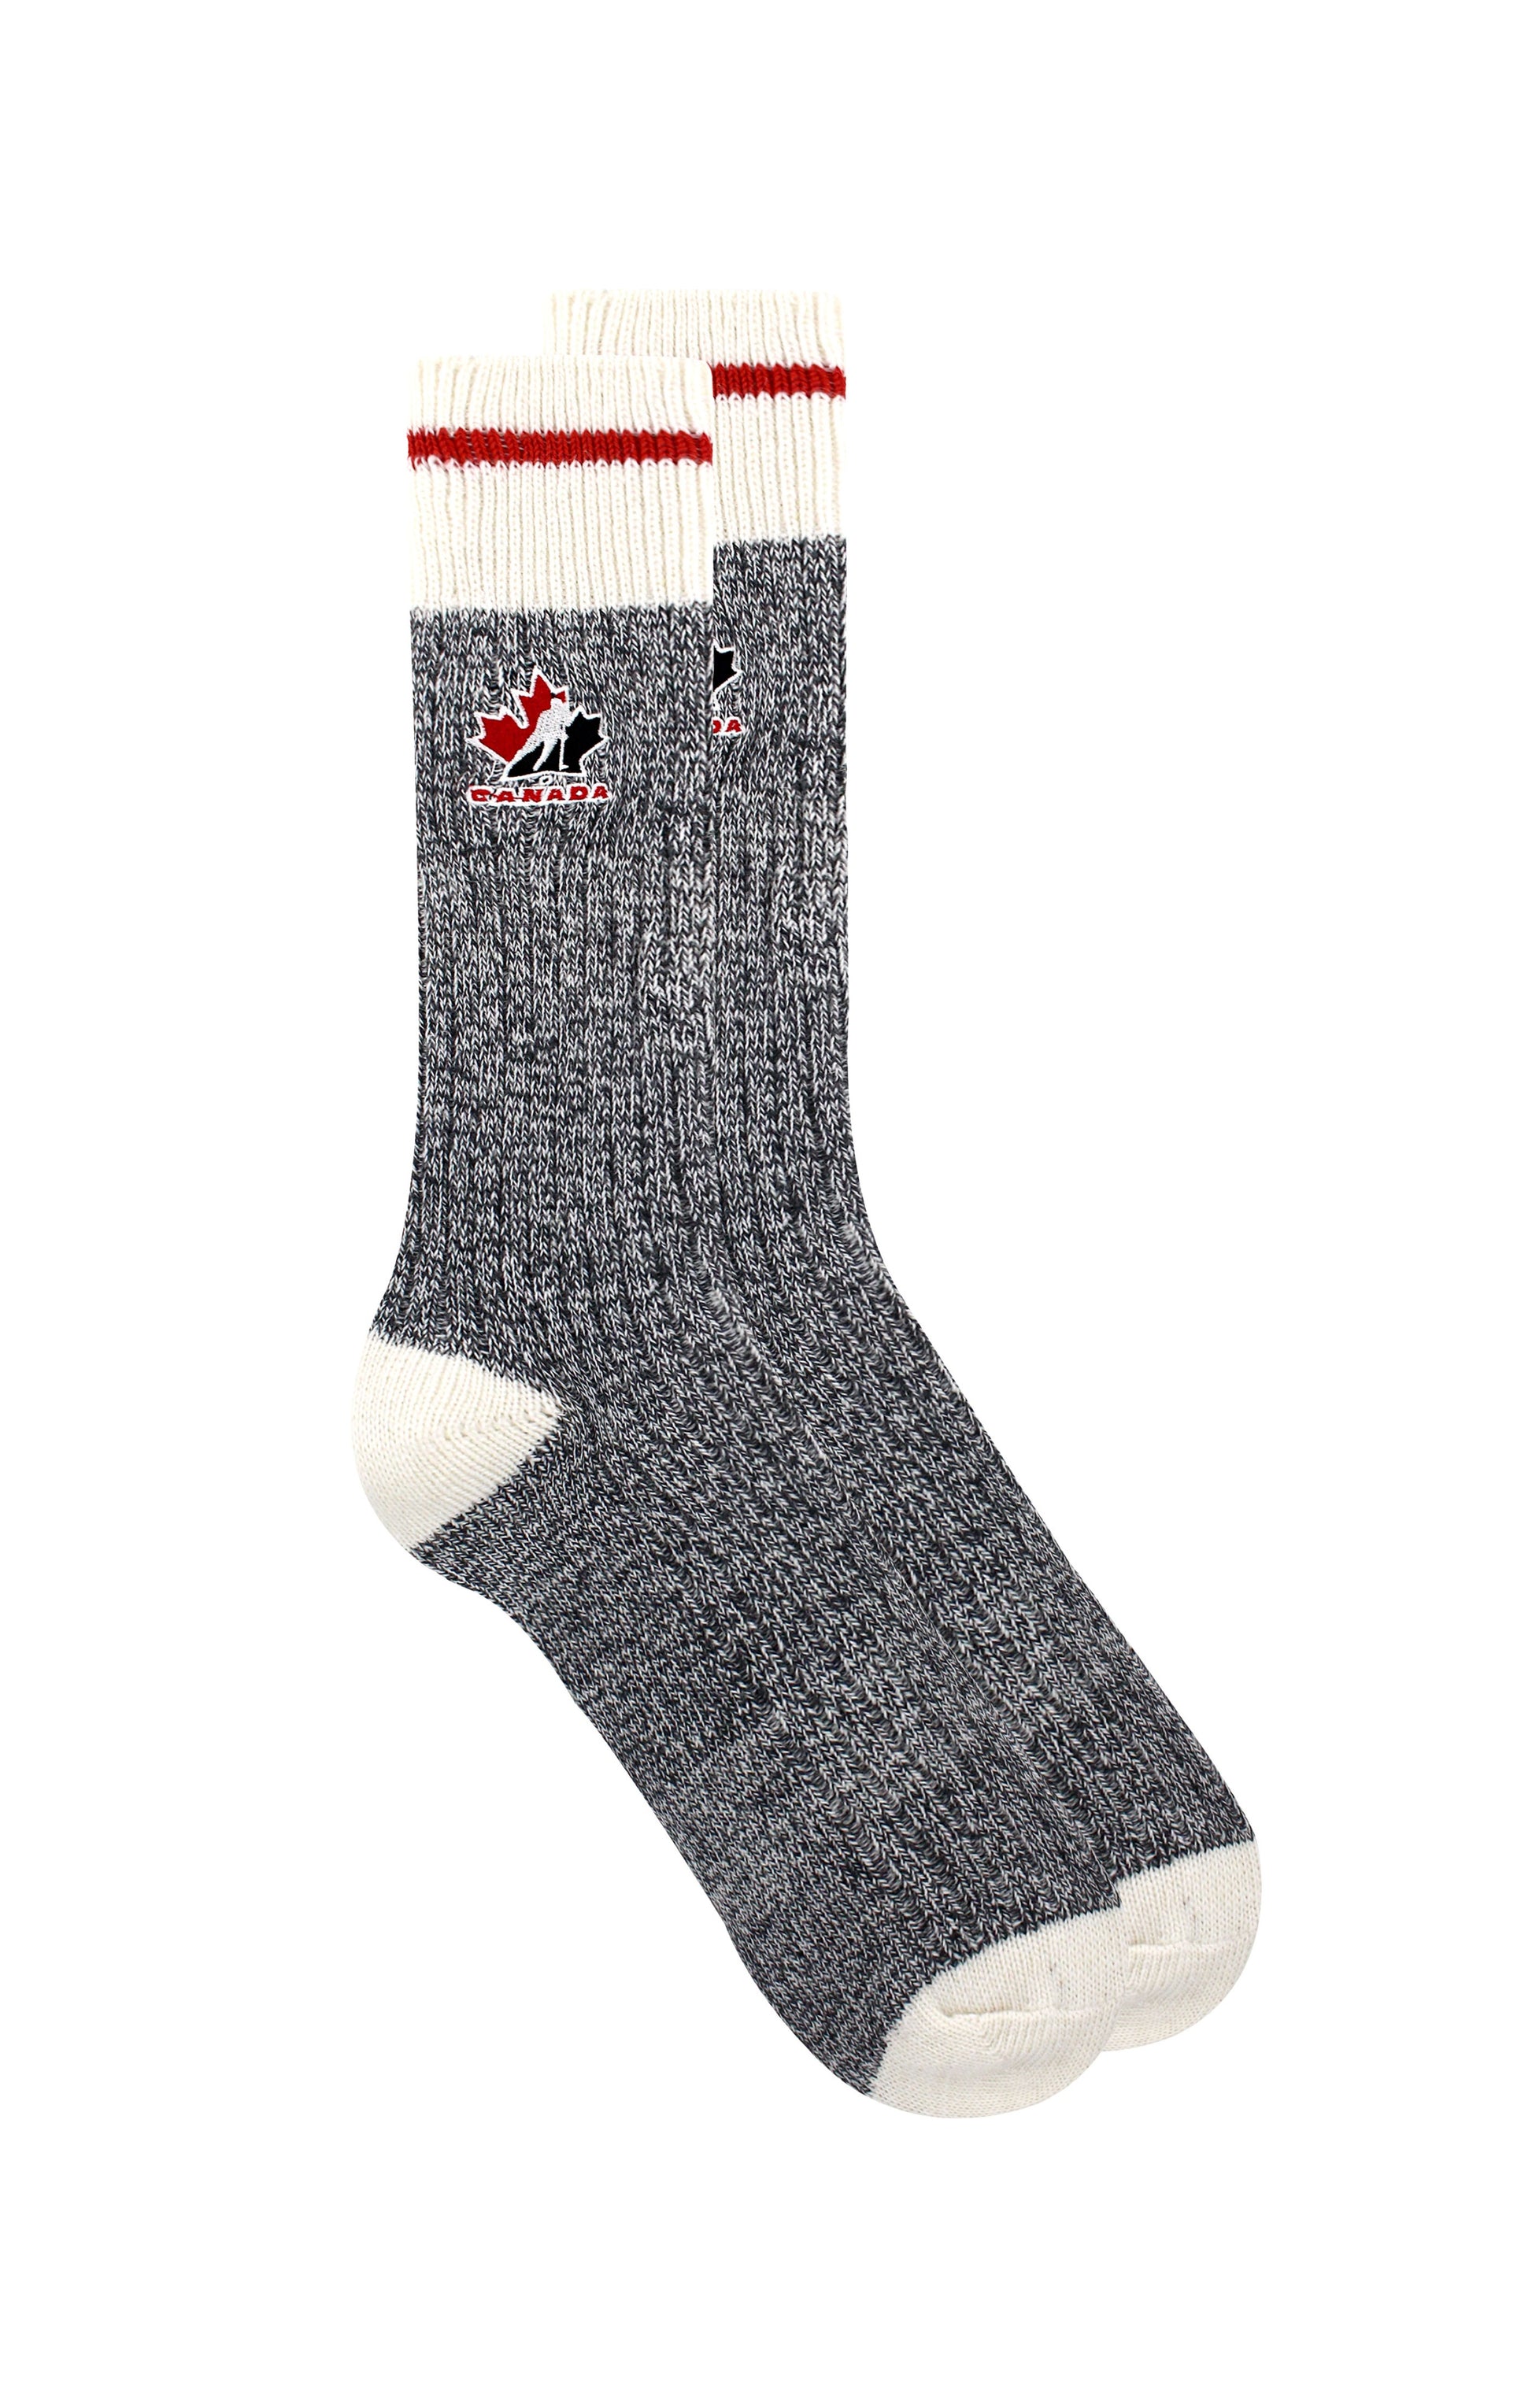 Gertex Hockey Canada Men's Boot Socks With Embroidery